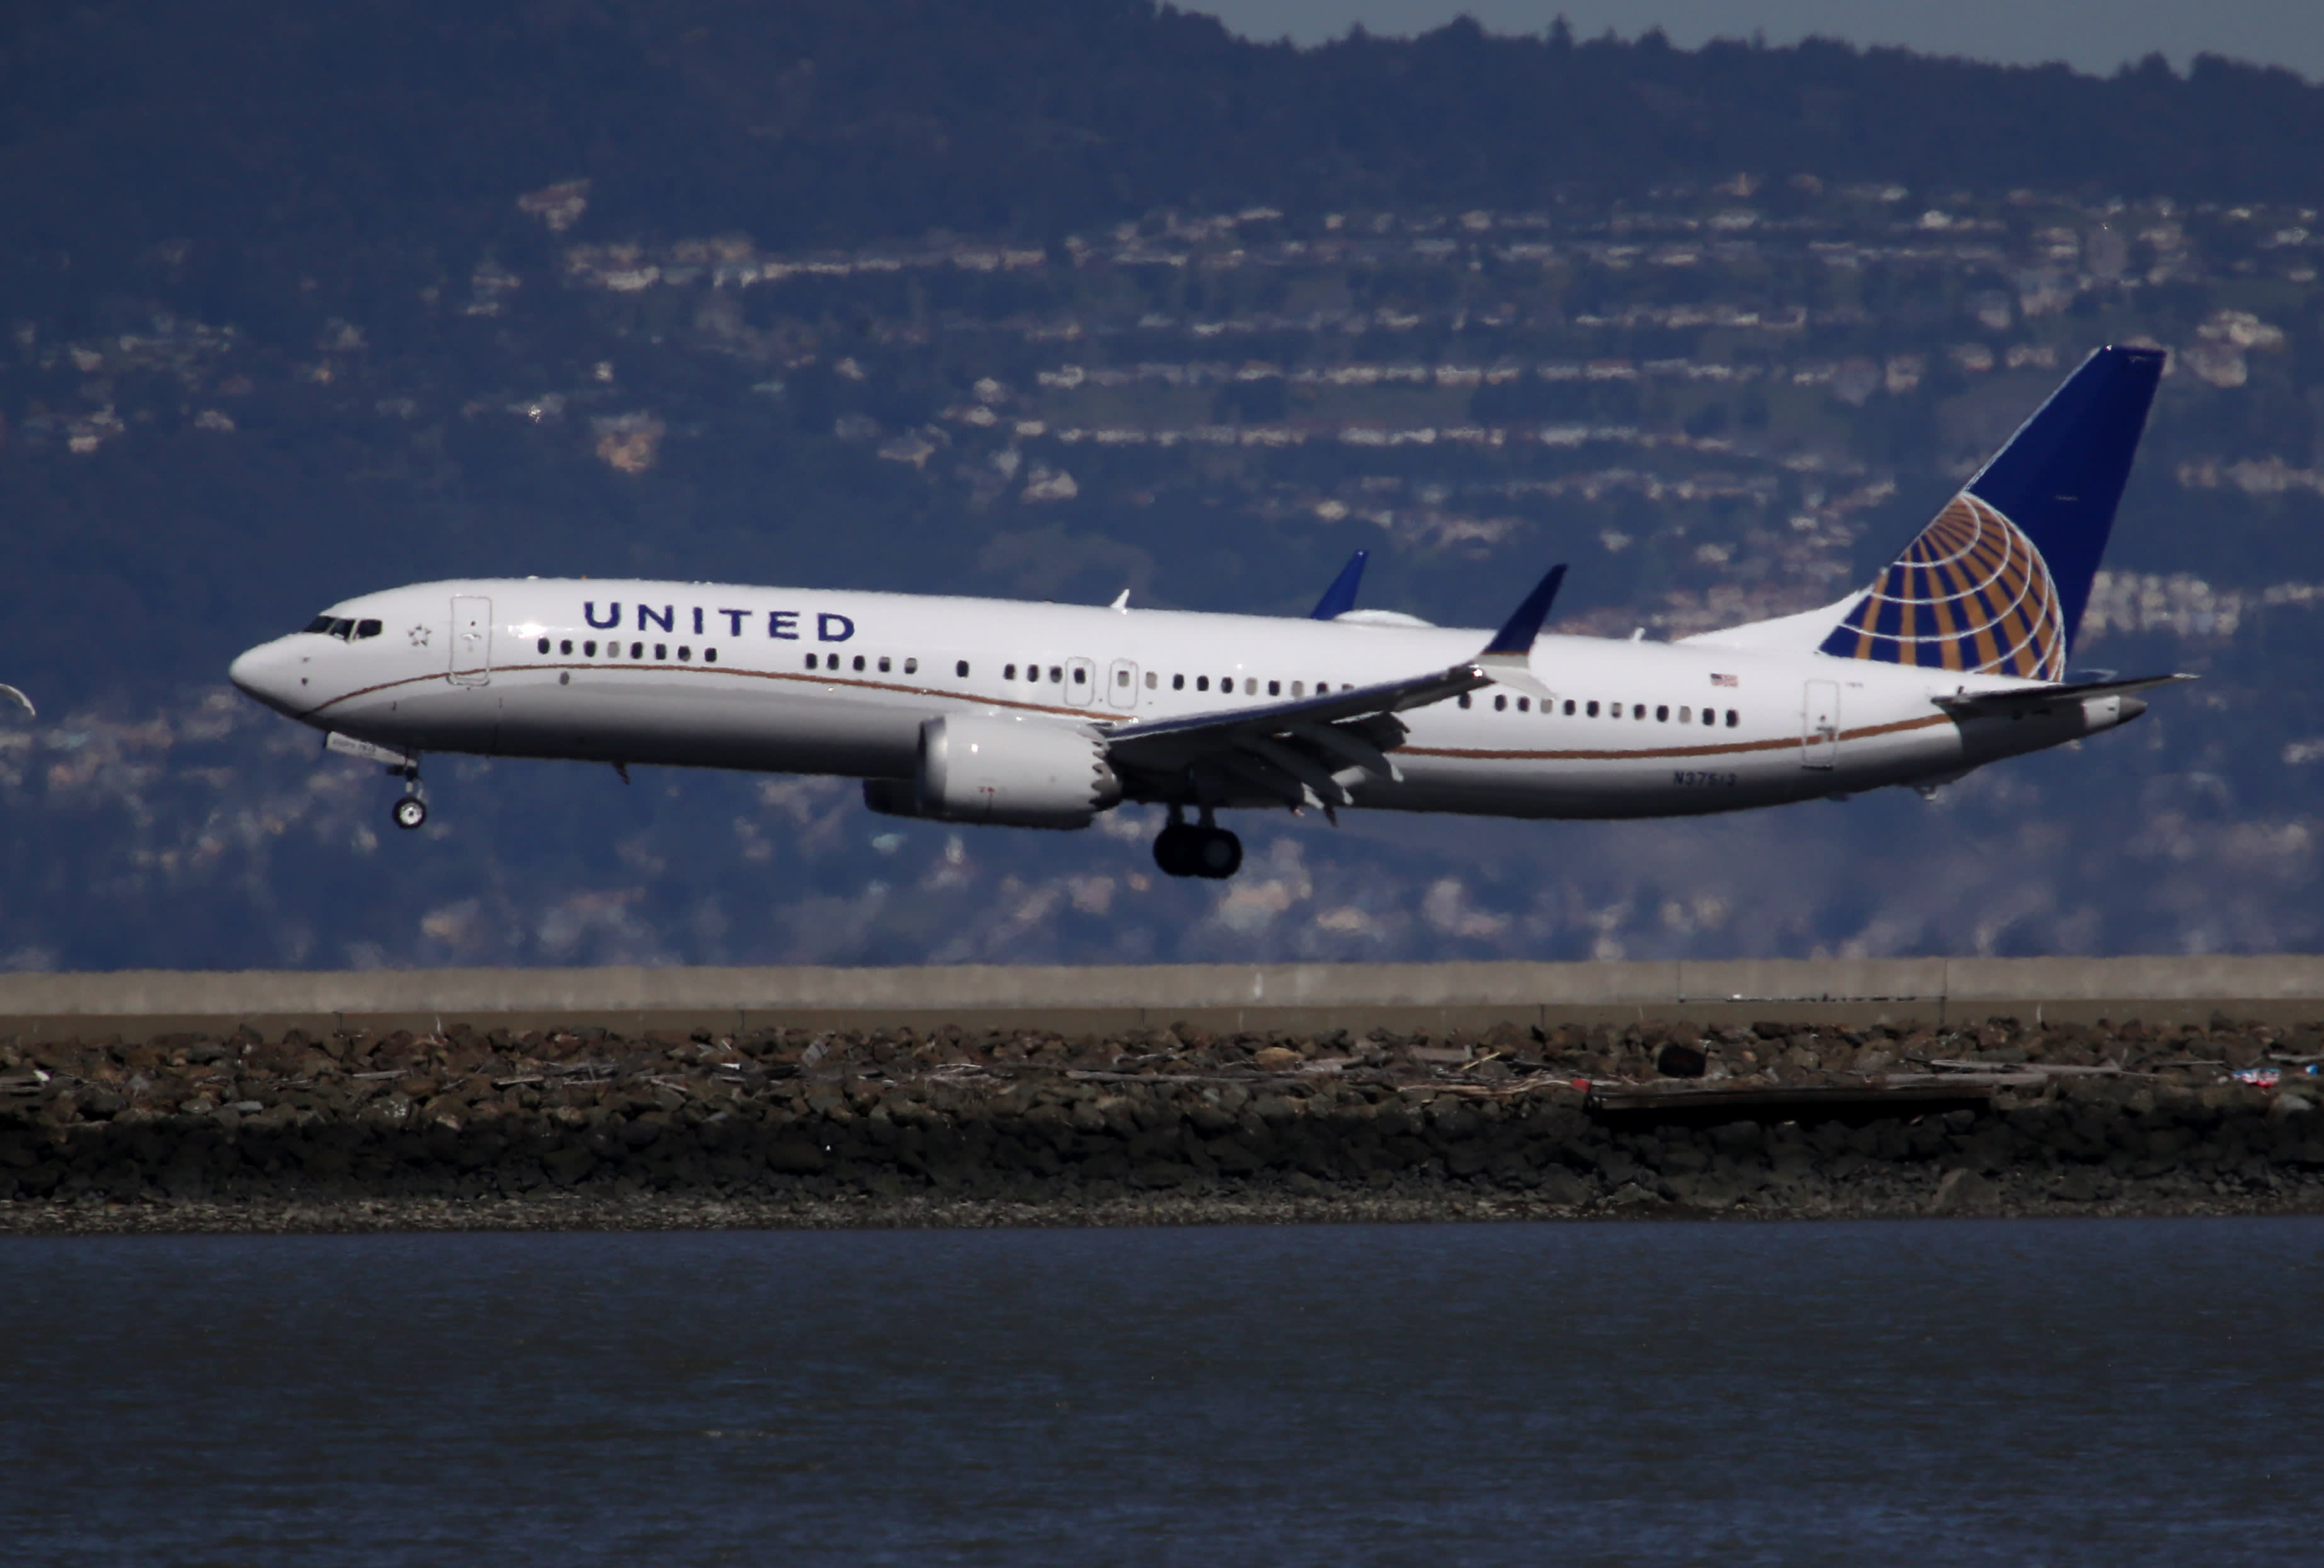 United returns Boeing 737 Max to commercial service after stranding